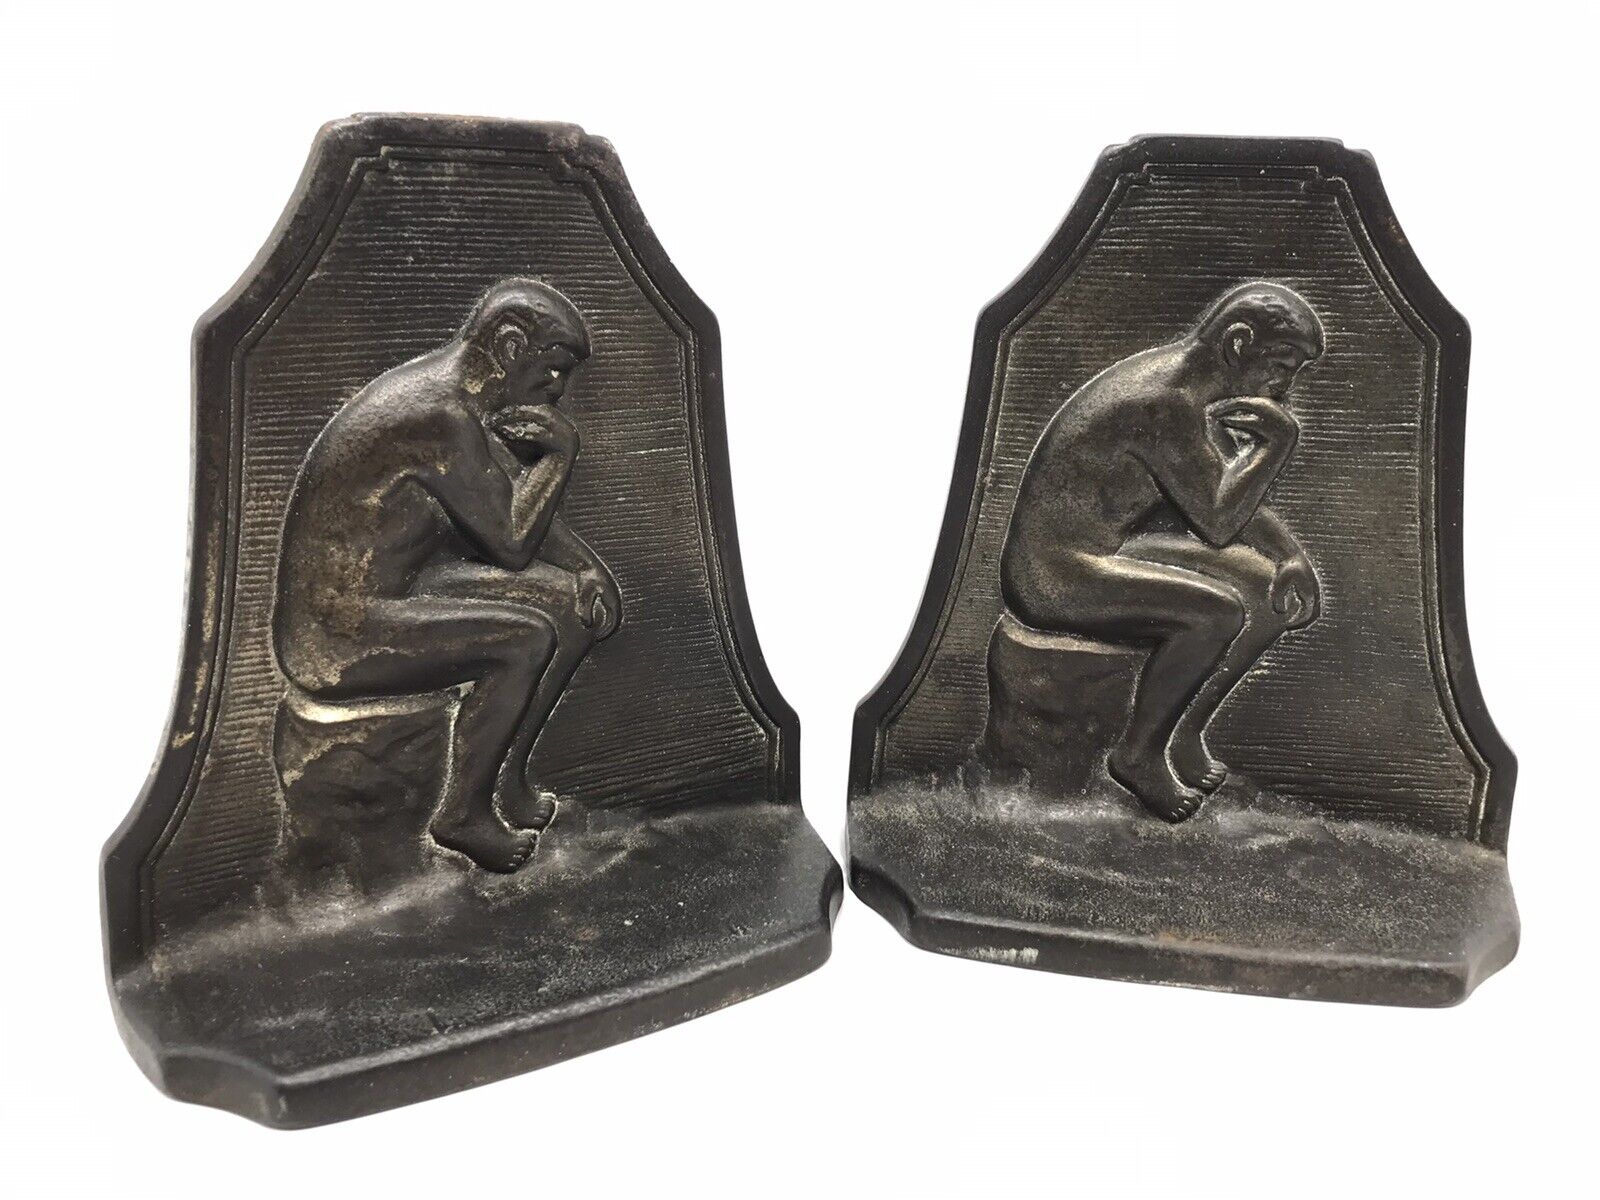 Pair of 1929 Connecticut Foundry “The Thinker” Heavy Metal Bookends